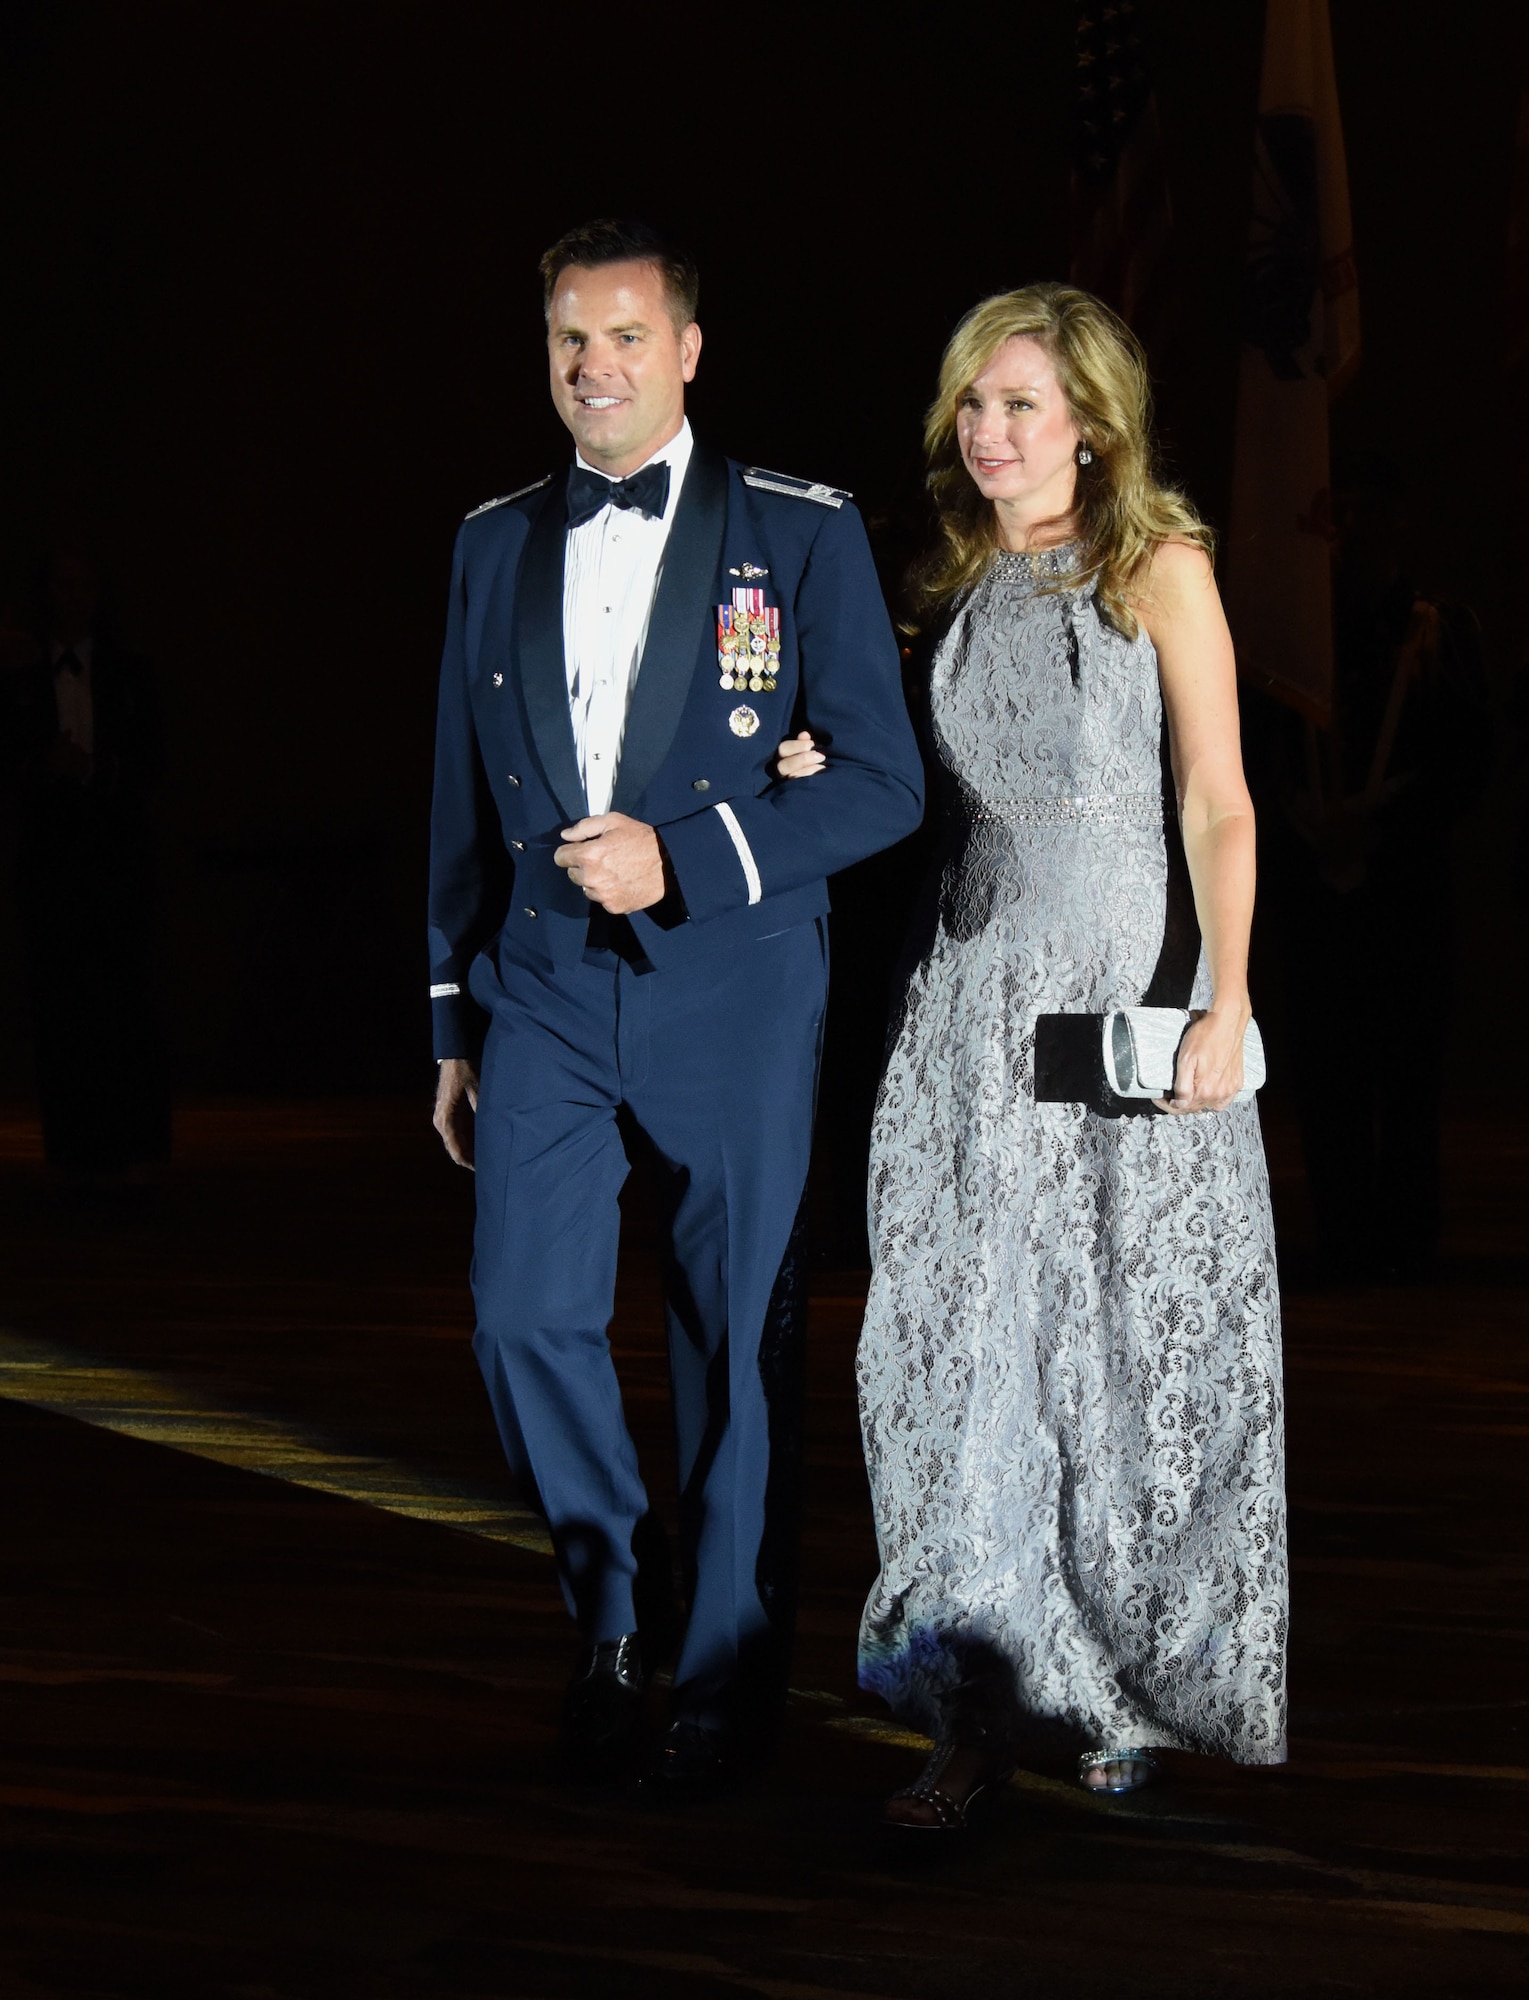 U.S. Air Force Col. Lance Burnett, 81st Training Wing vice commander, and his wife Andrea, make their way to the head table during the 40th Annual Salute to the Military inside the Mississippi Coast Convention Center, in Biloxi, Mississippi, Oct. 16, 2018. The Salute to the Military event recognized the men and women who serve in the military along the Gulf Coast. (U.S. Air Force photo by Kemberly Groue)